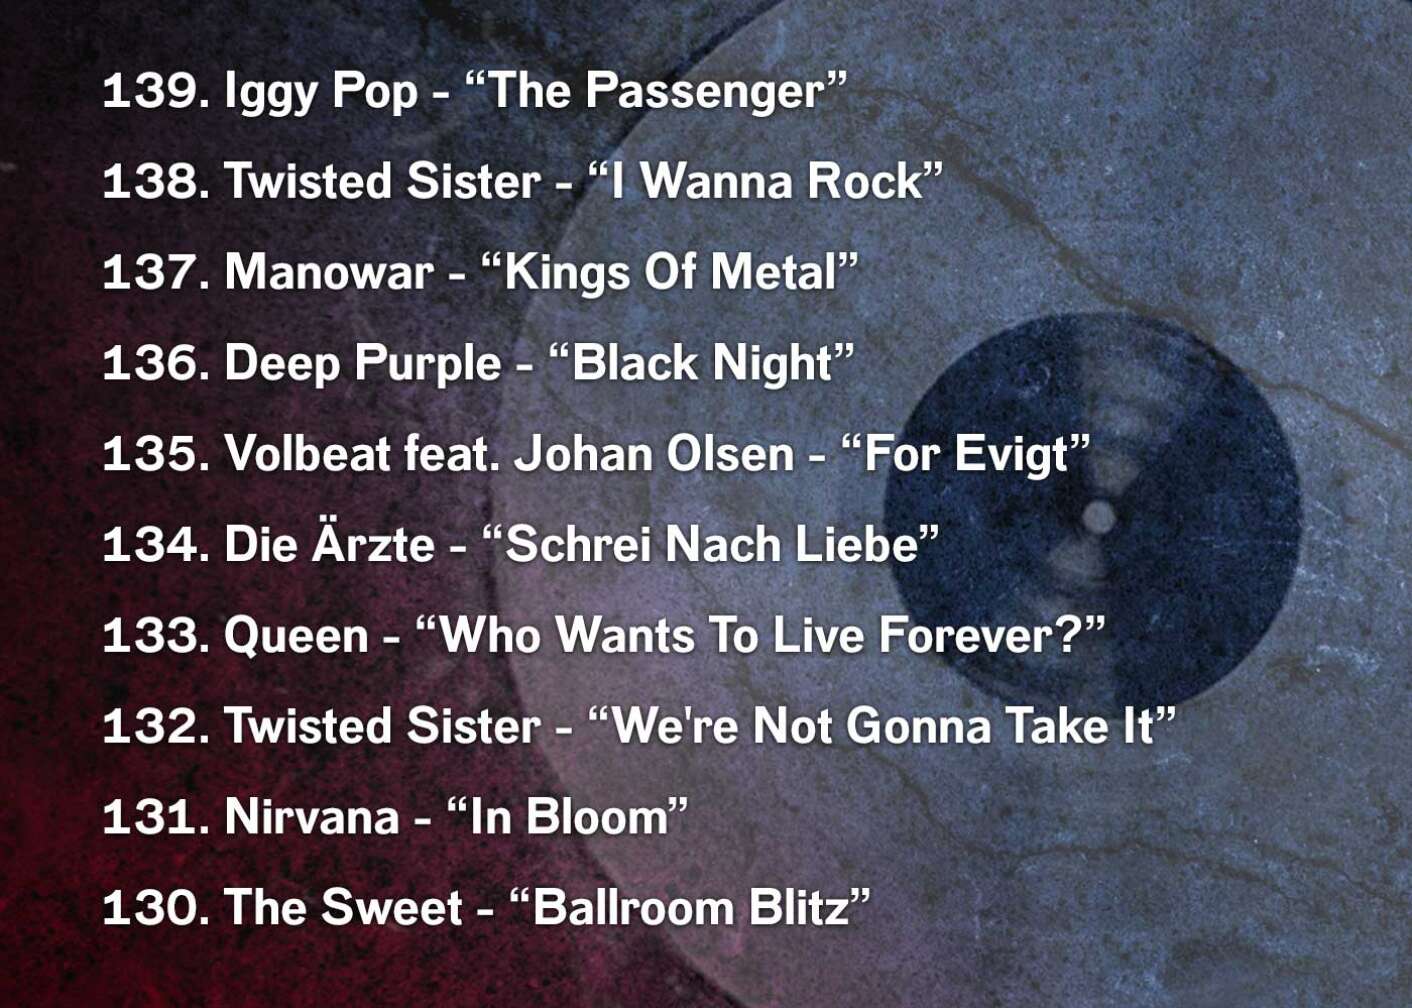 139. Iggy Pop - “The Passenger” 138. Twisted Sister - “I Wanna Rock” 137. Manowar - “Kings Of Metal” 136. Deep Purple - “Black Night” 135. Volbeat feat. Johan Olsen - “For Evigt” 134. Die Ärzte - “Schrei Nach Liebe” 133. Queen - “Who Wants To Live Forever?” 132. Twisted Sister - “We're Not Gonna Take It” 131. Nirvana - “In Bloom” 130. The Sweet - “Ballroom Blitz”